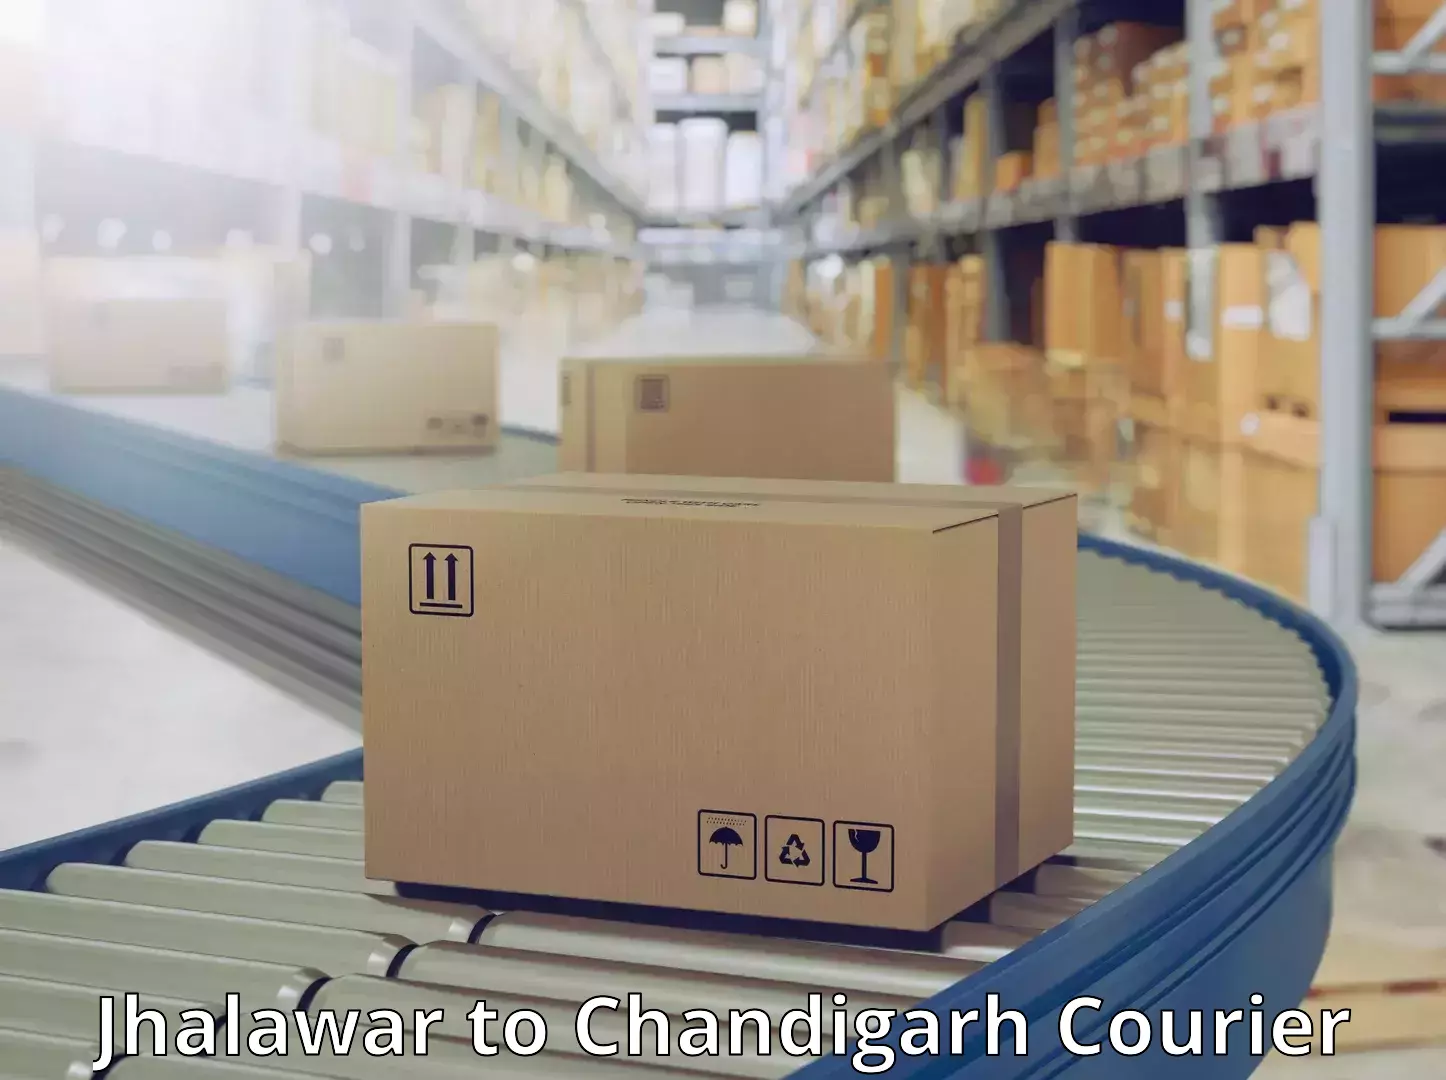 Courier service innovation Jhalawar to Chandigarh